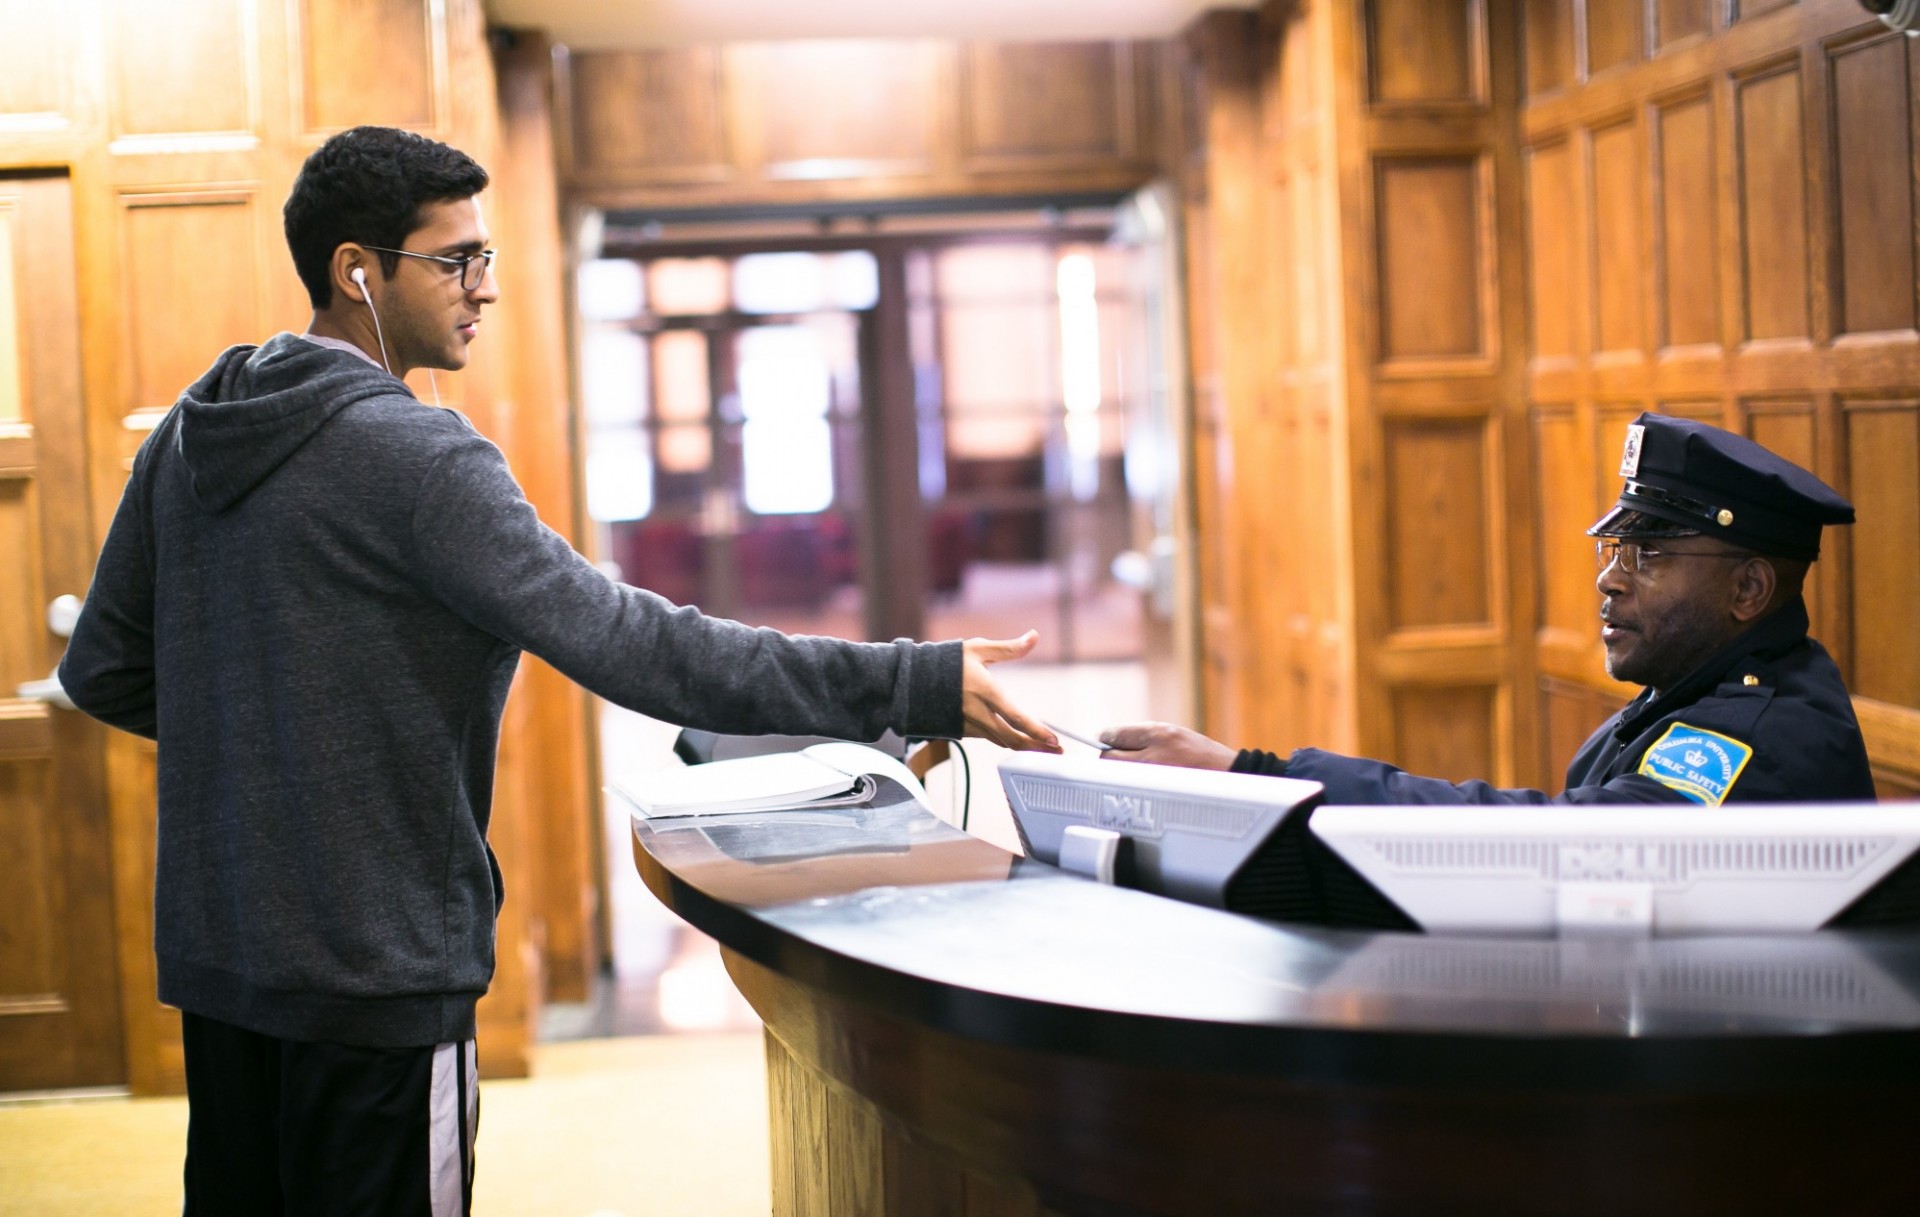 A student handing their ID to a guard at a security desk at a residence hall